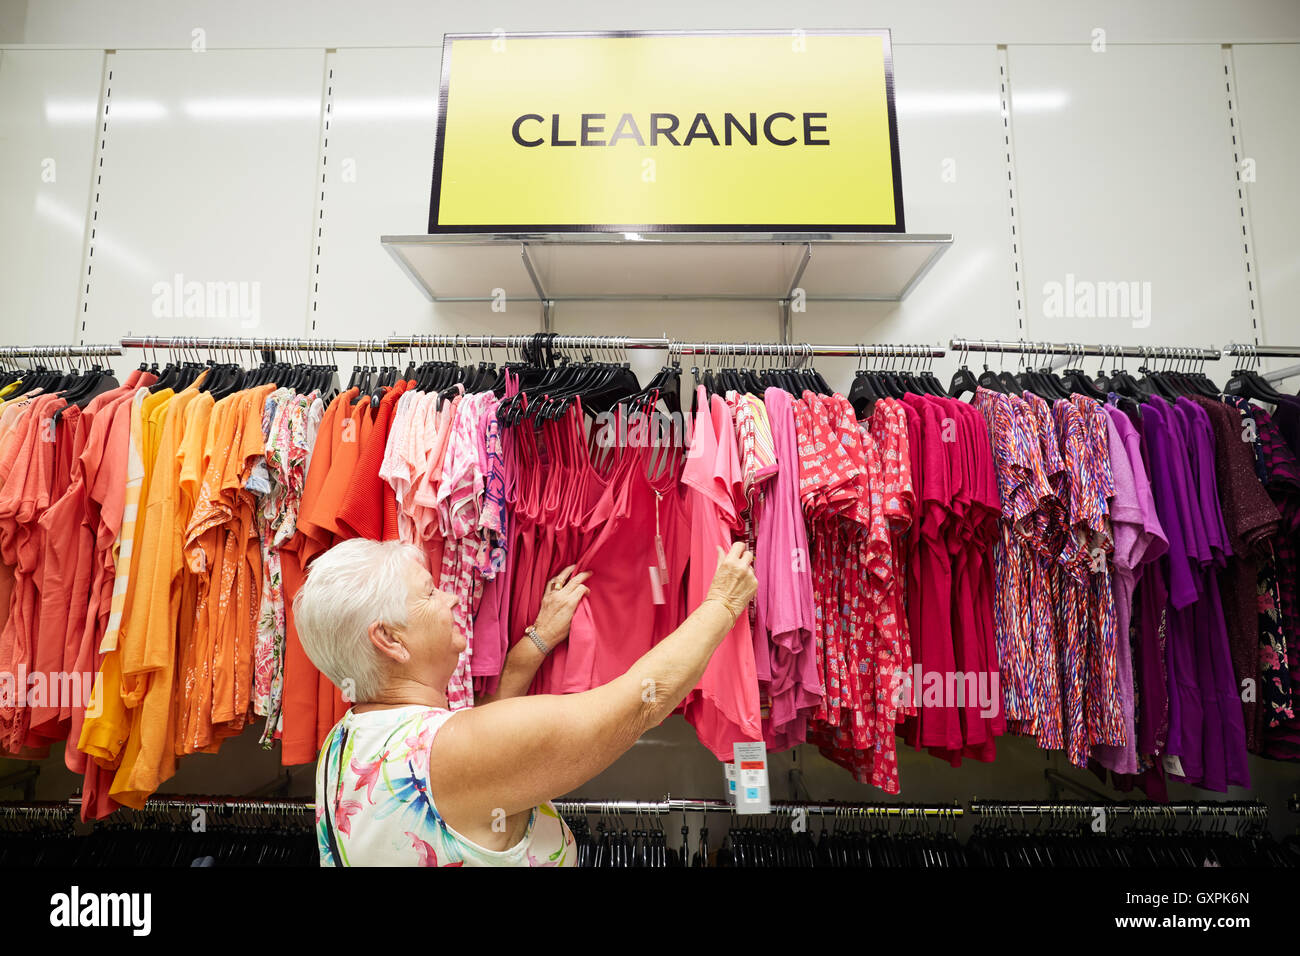 clearance section of a clothing store Stock Photo - Alamy